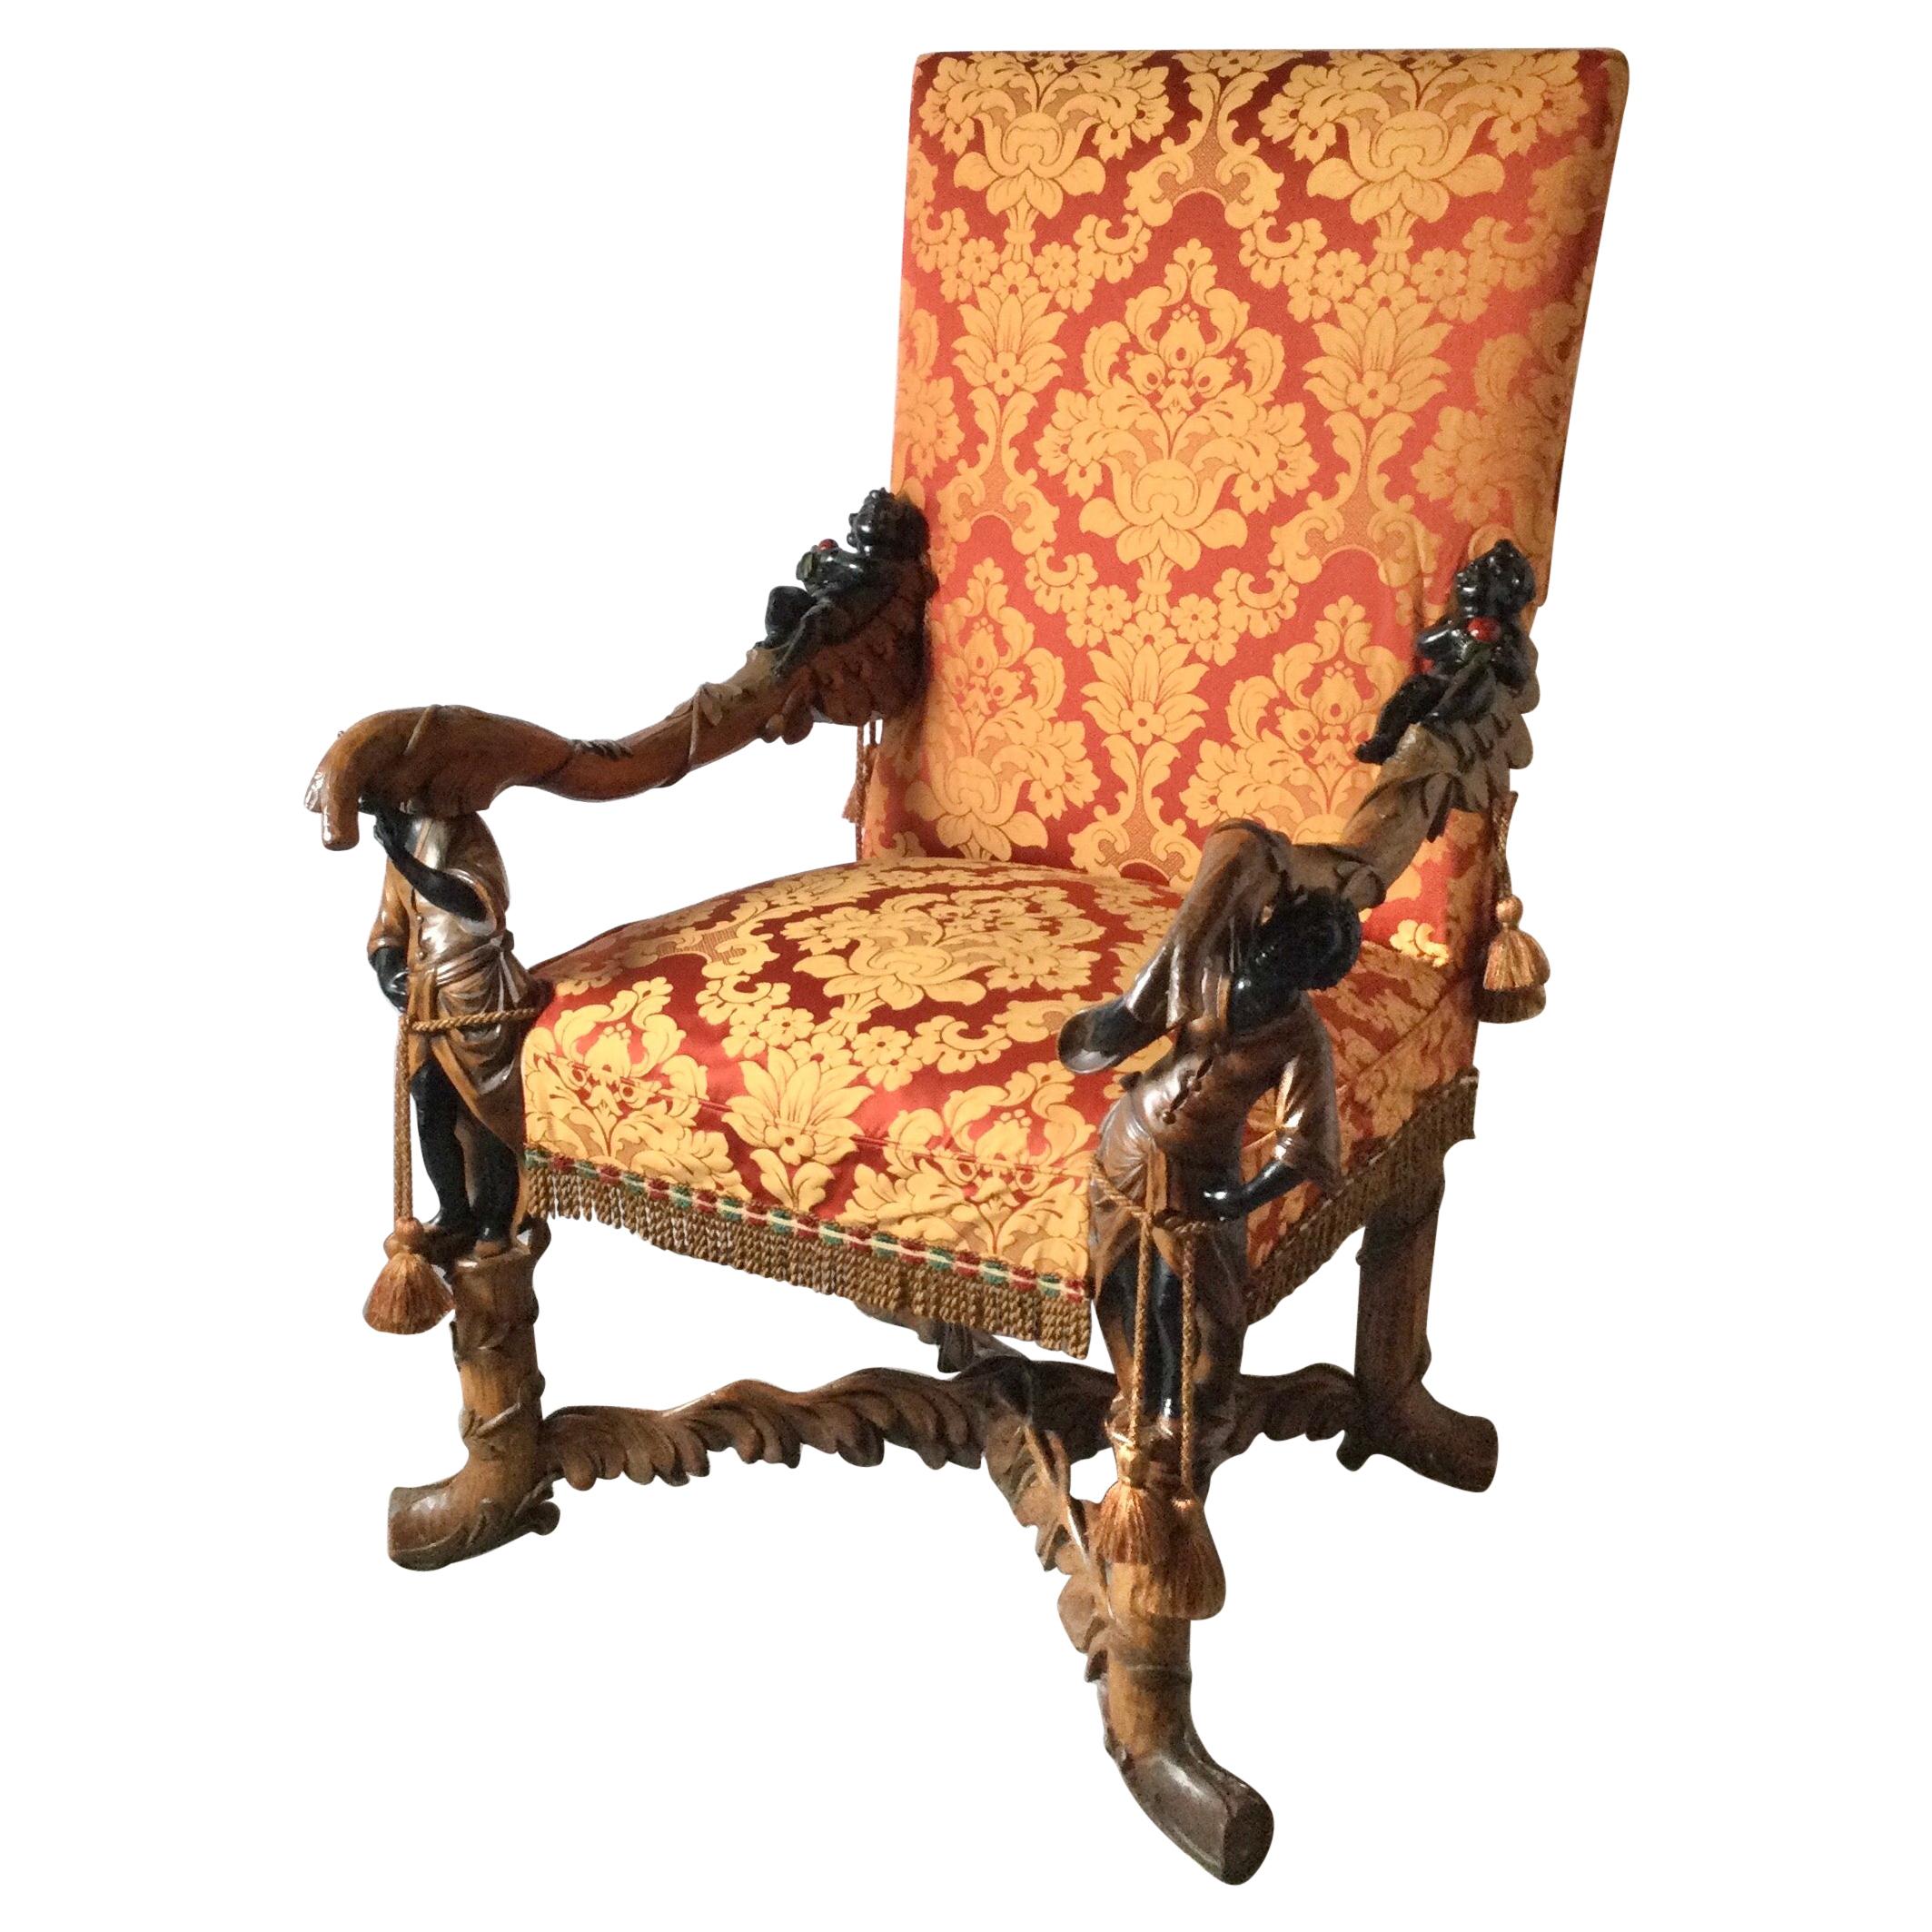 Rare and Elaborately Carved Lolling Chair